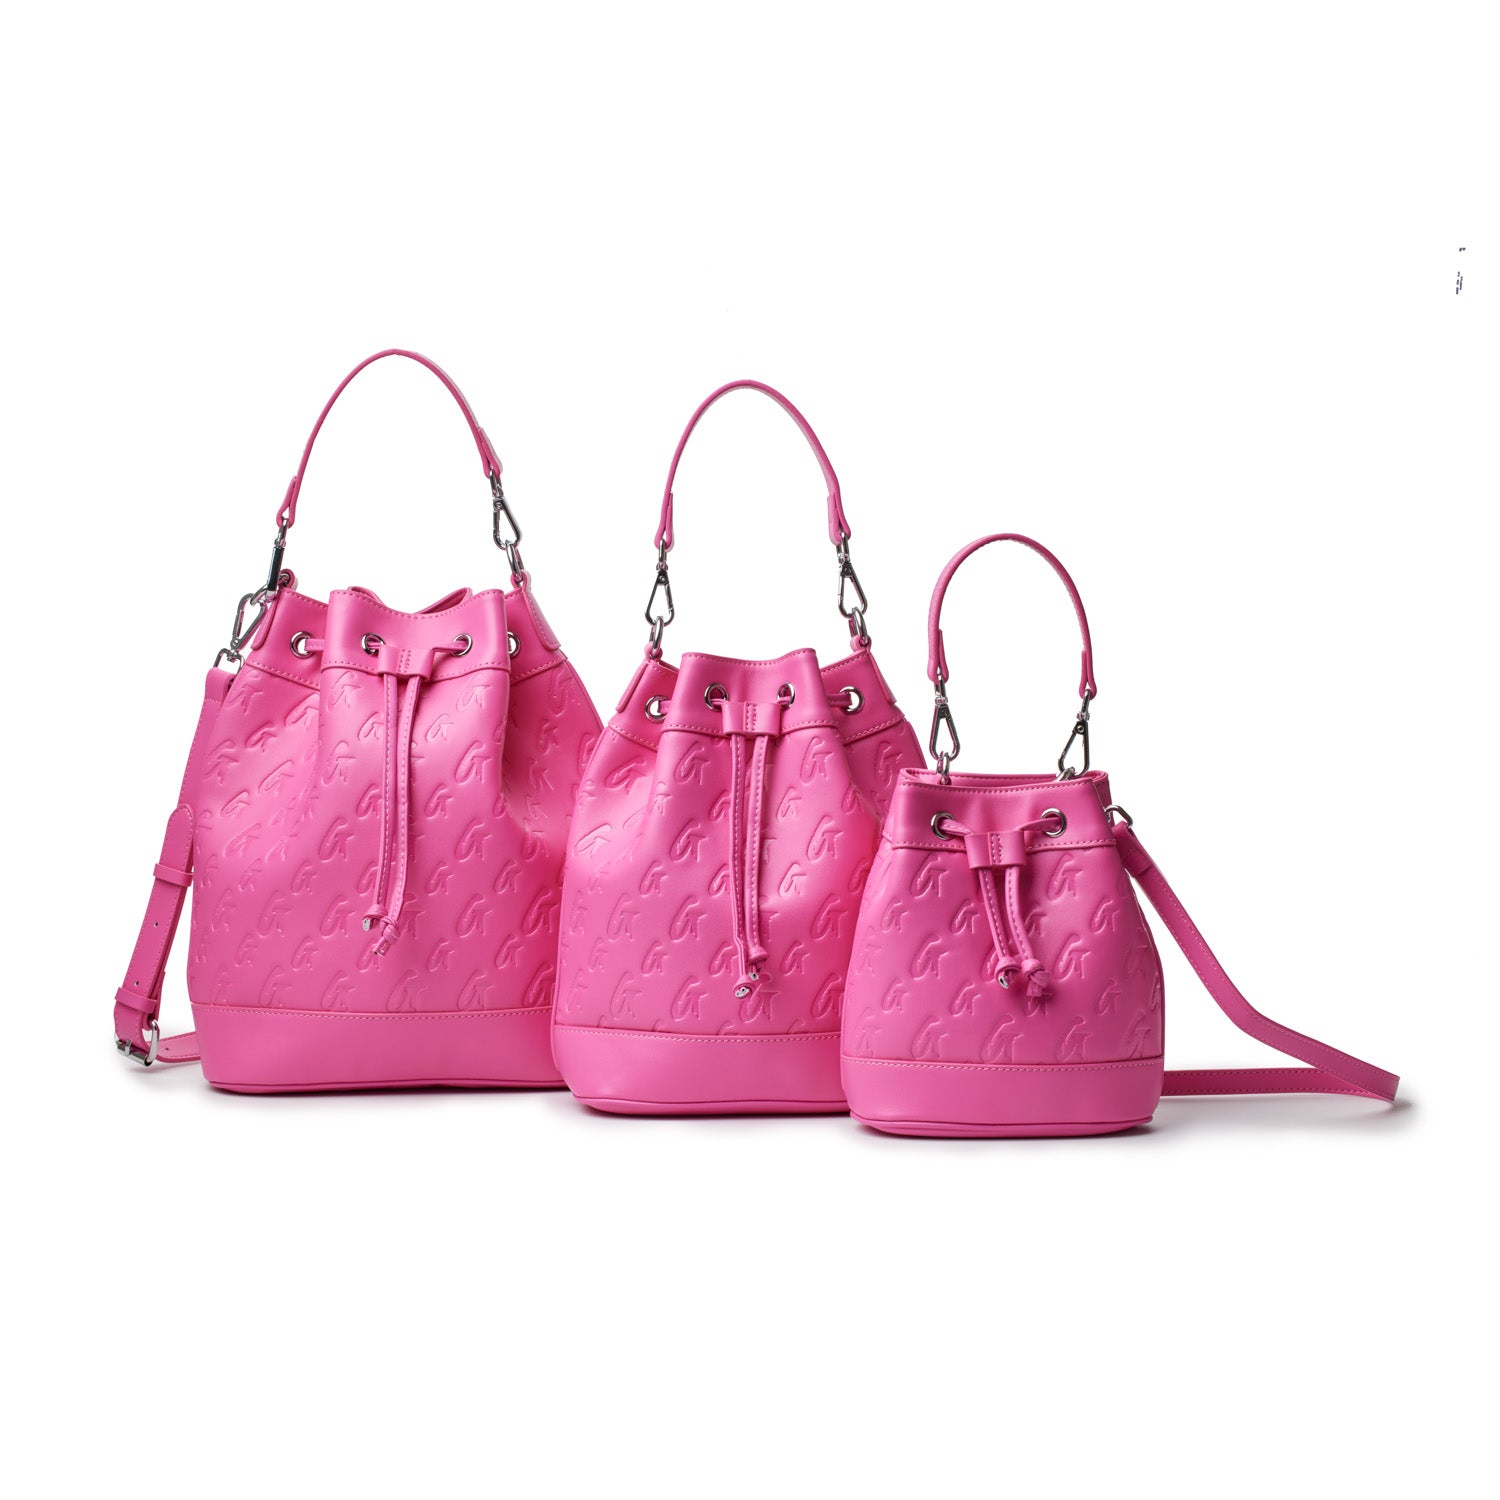 UNBOXING MY GLAM-AHOLIC LIFESTYLE Hot Pink Large Bucket Bag- Coach MEETS  Glam-Aholic Lifestyle 